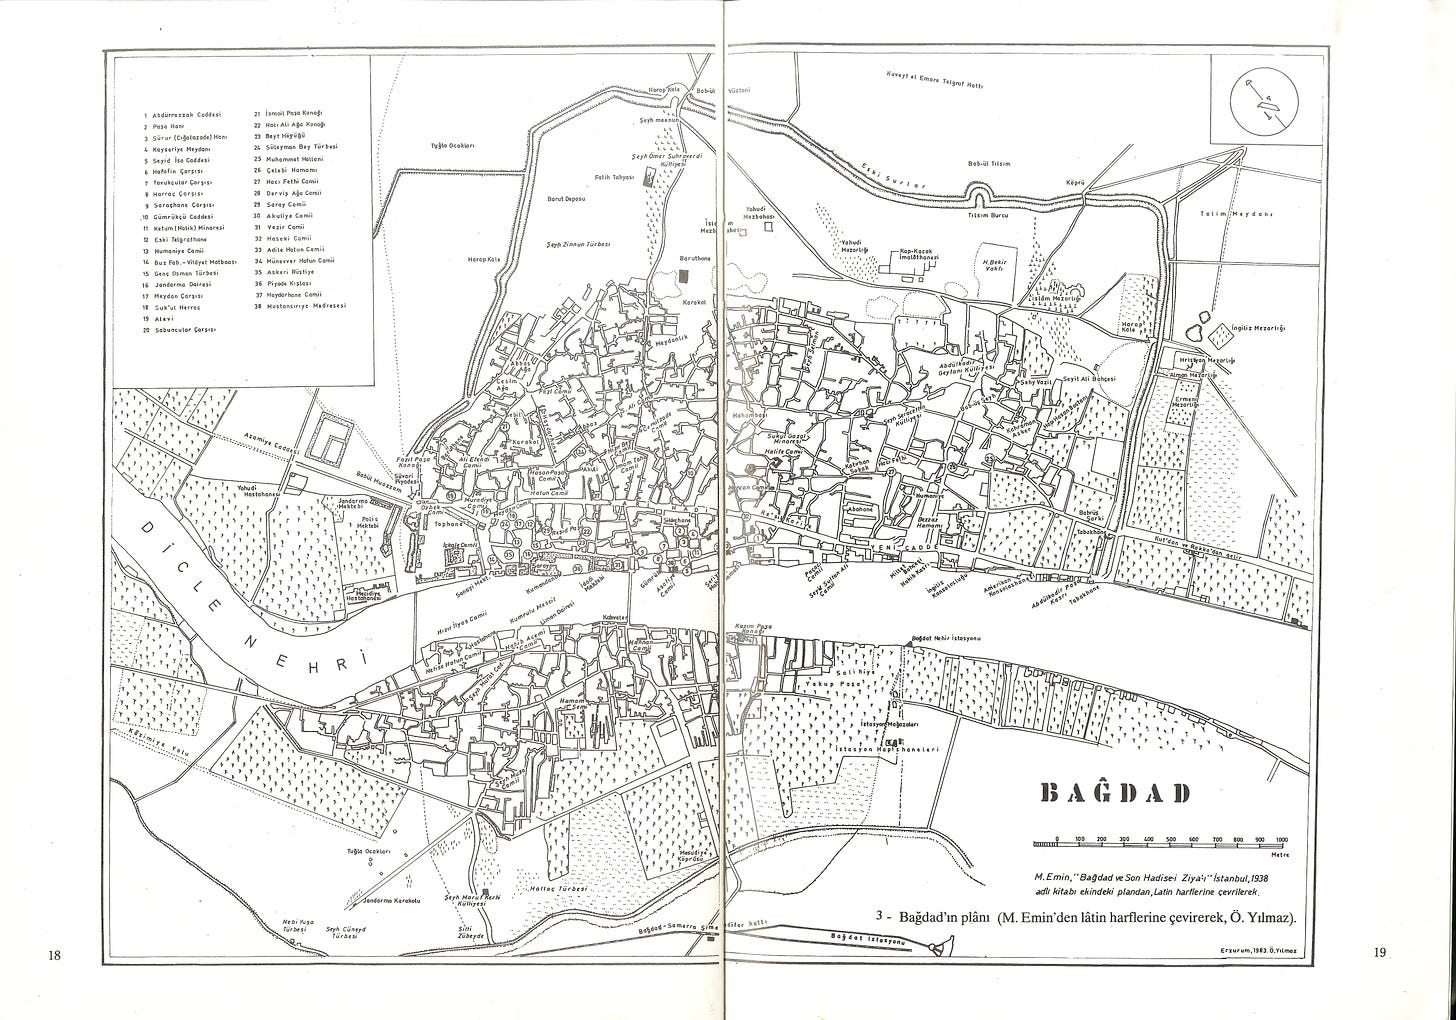 Map of Baghdad in 1938